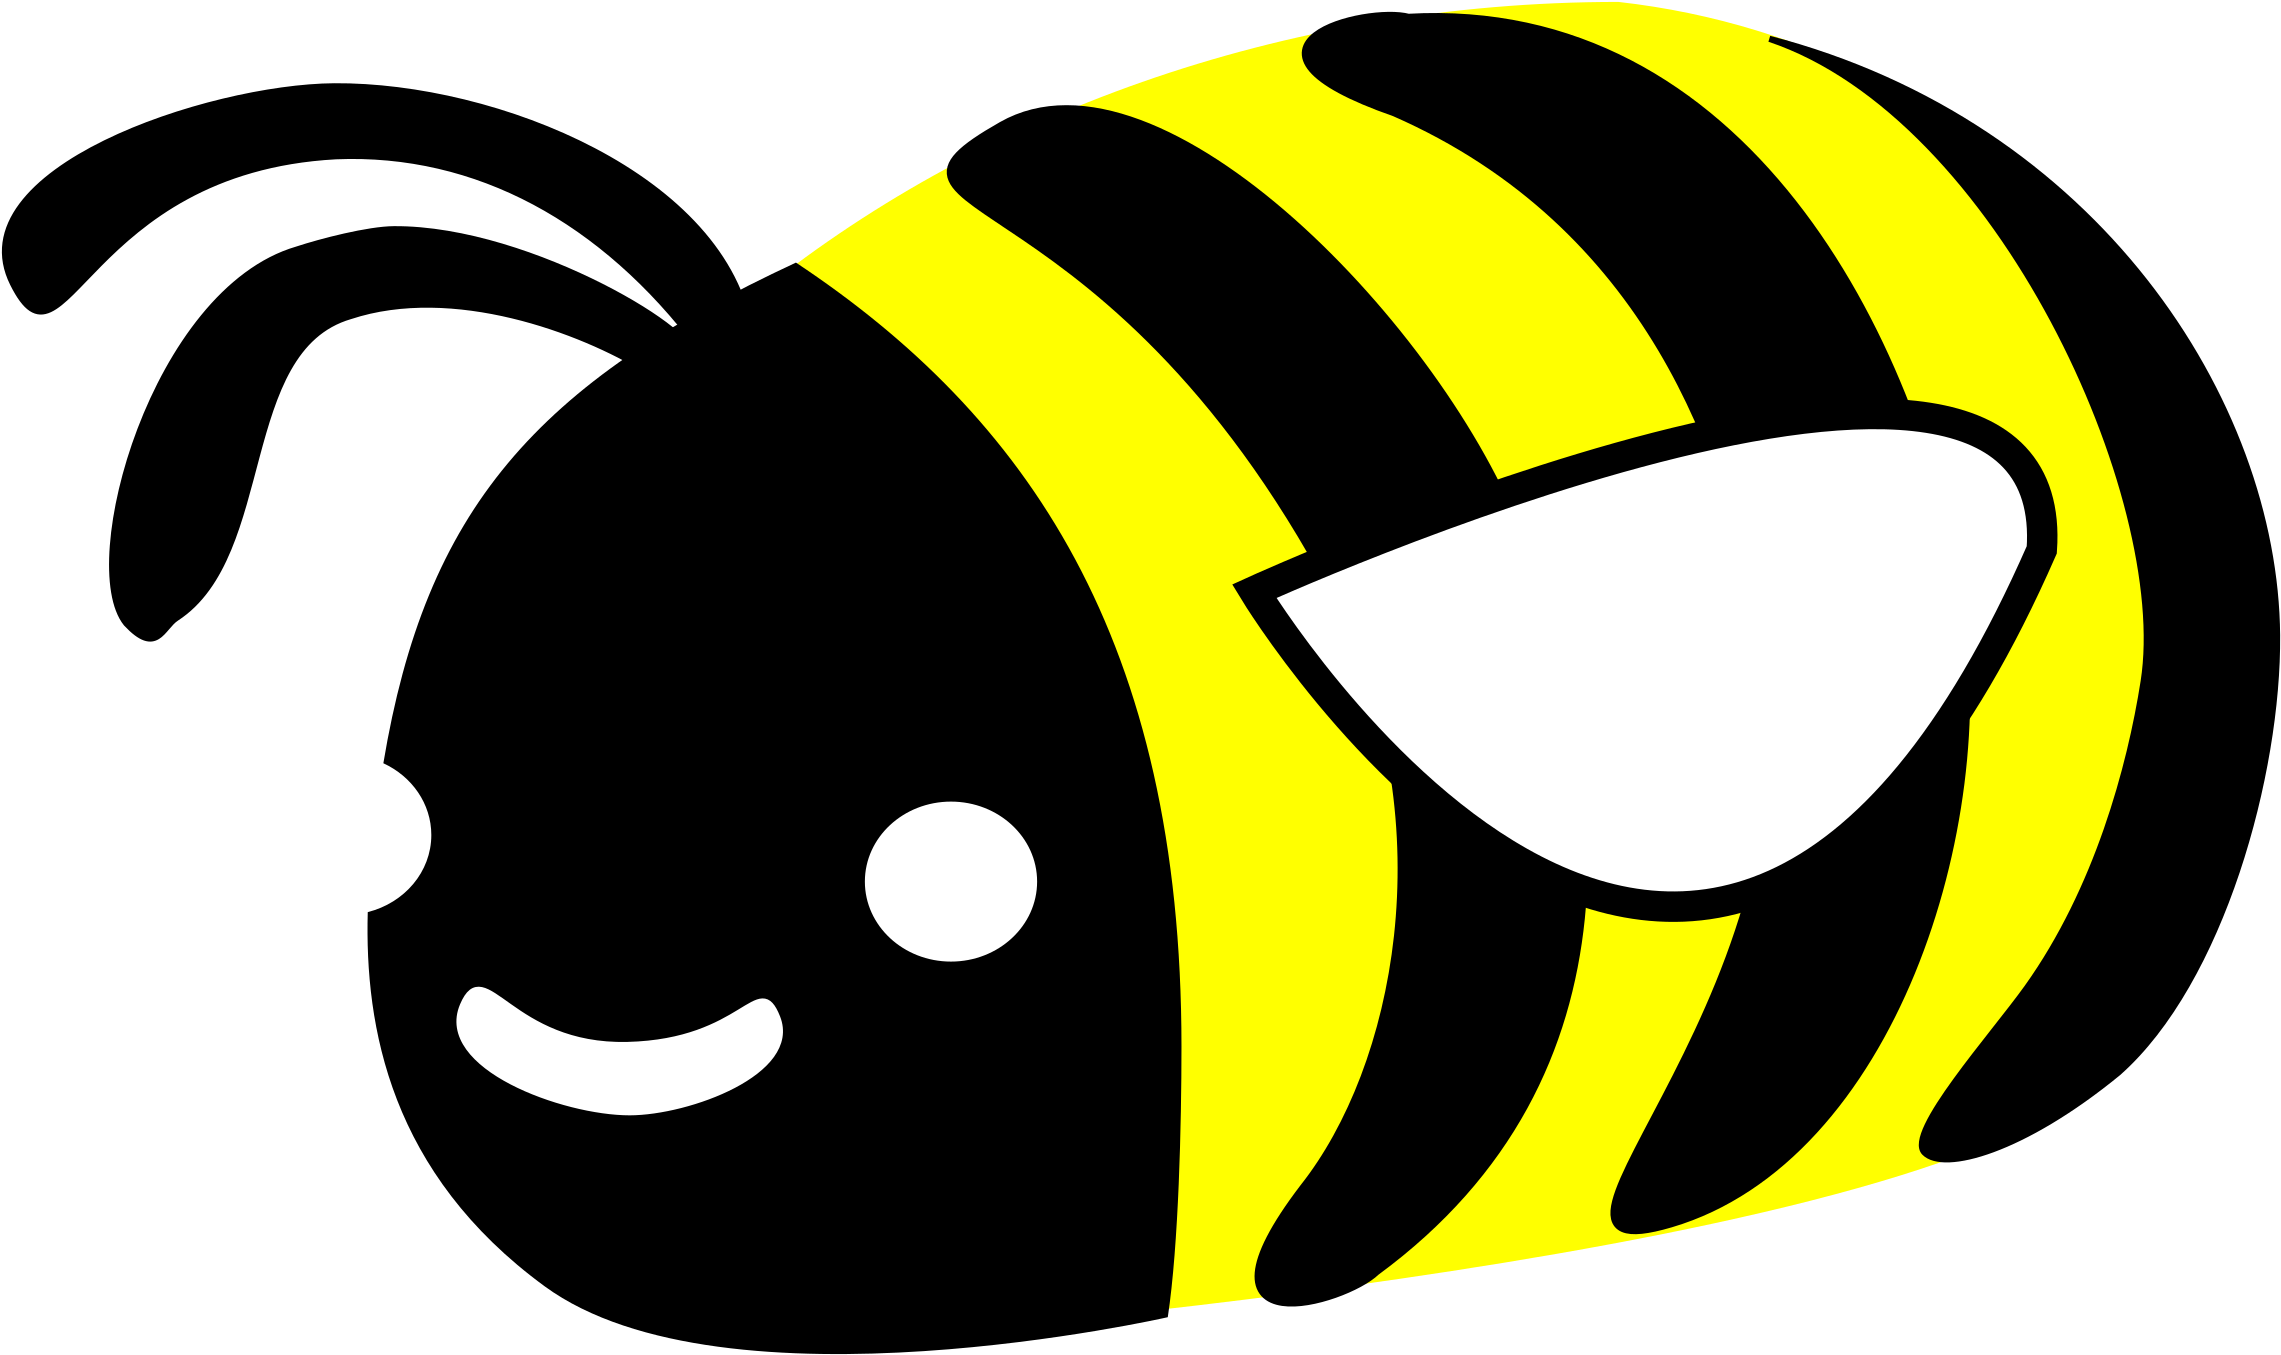 Bumble Bee - Bumble Bee Png (2400x1474)